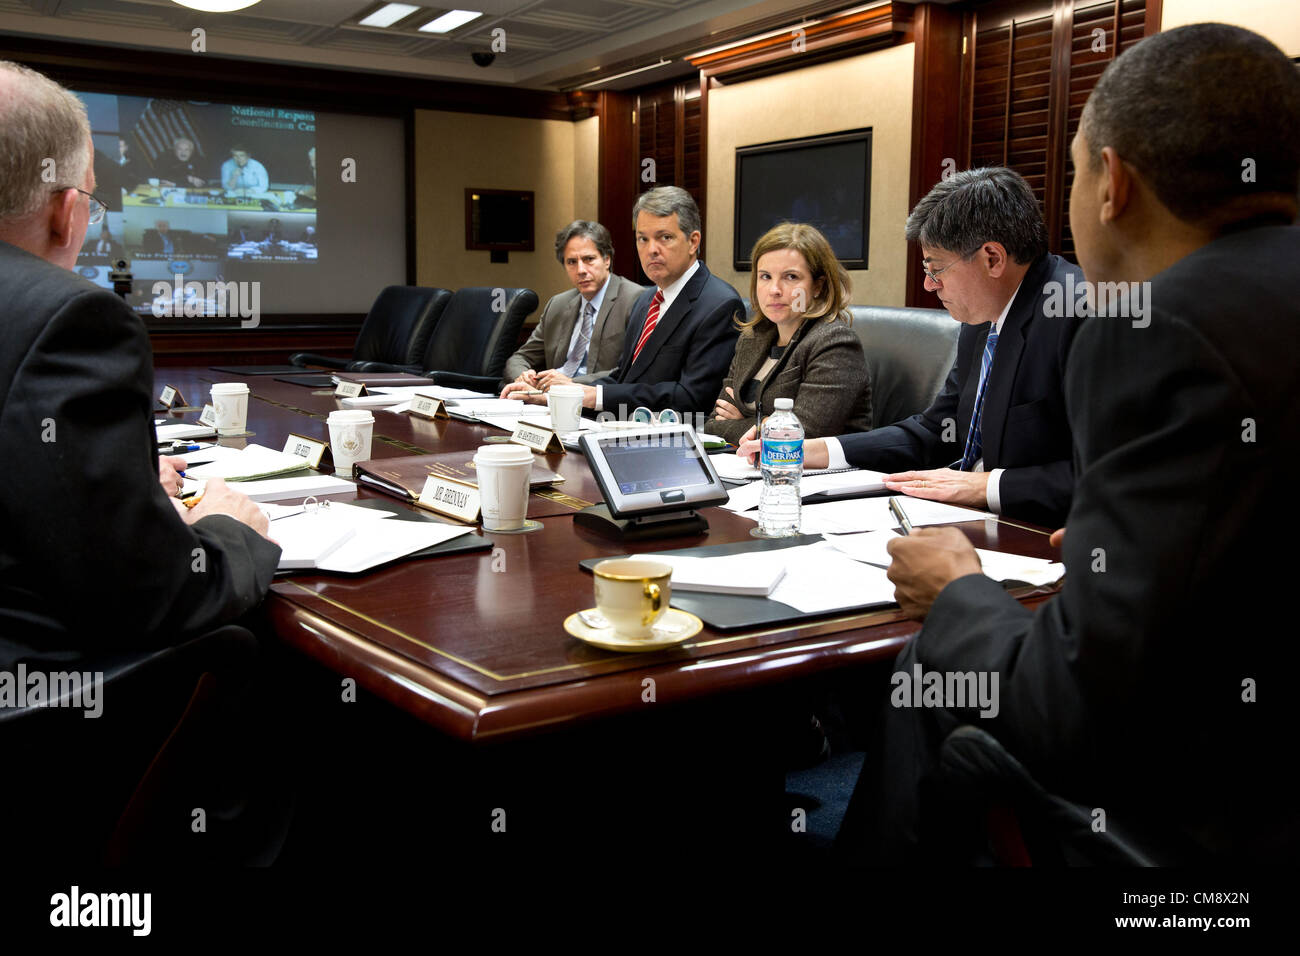 US President Barack Obama receives an update on Hurricane Sandy in the Situation Room of the White House October 30, 2012 in Washington, DC. Pictured, from left, are: John Brennan, Assistant to the President for Homeland Security and Counterterrorism; Tony Blinken, National Security Advisor to the Vice President; David Agnew, Director for Intergovernmental Affairs; Alyssa Mastromonaco, Deputy Chief of Staff for Operations; and Chief of Staff Jack Lew. Stock Photo